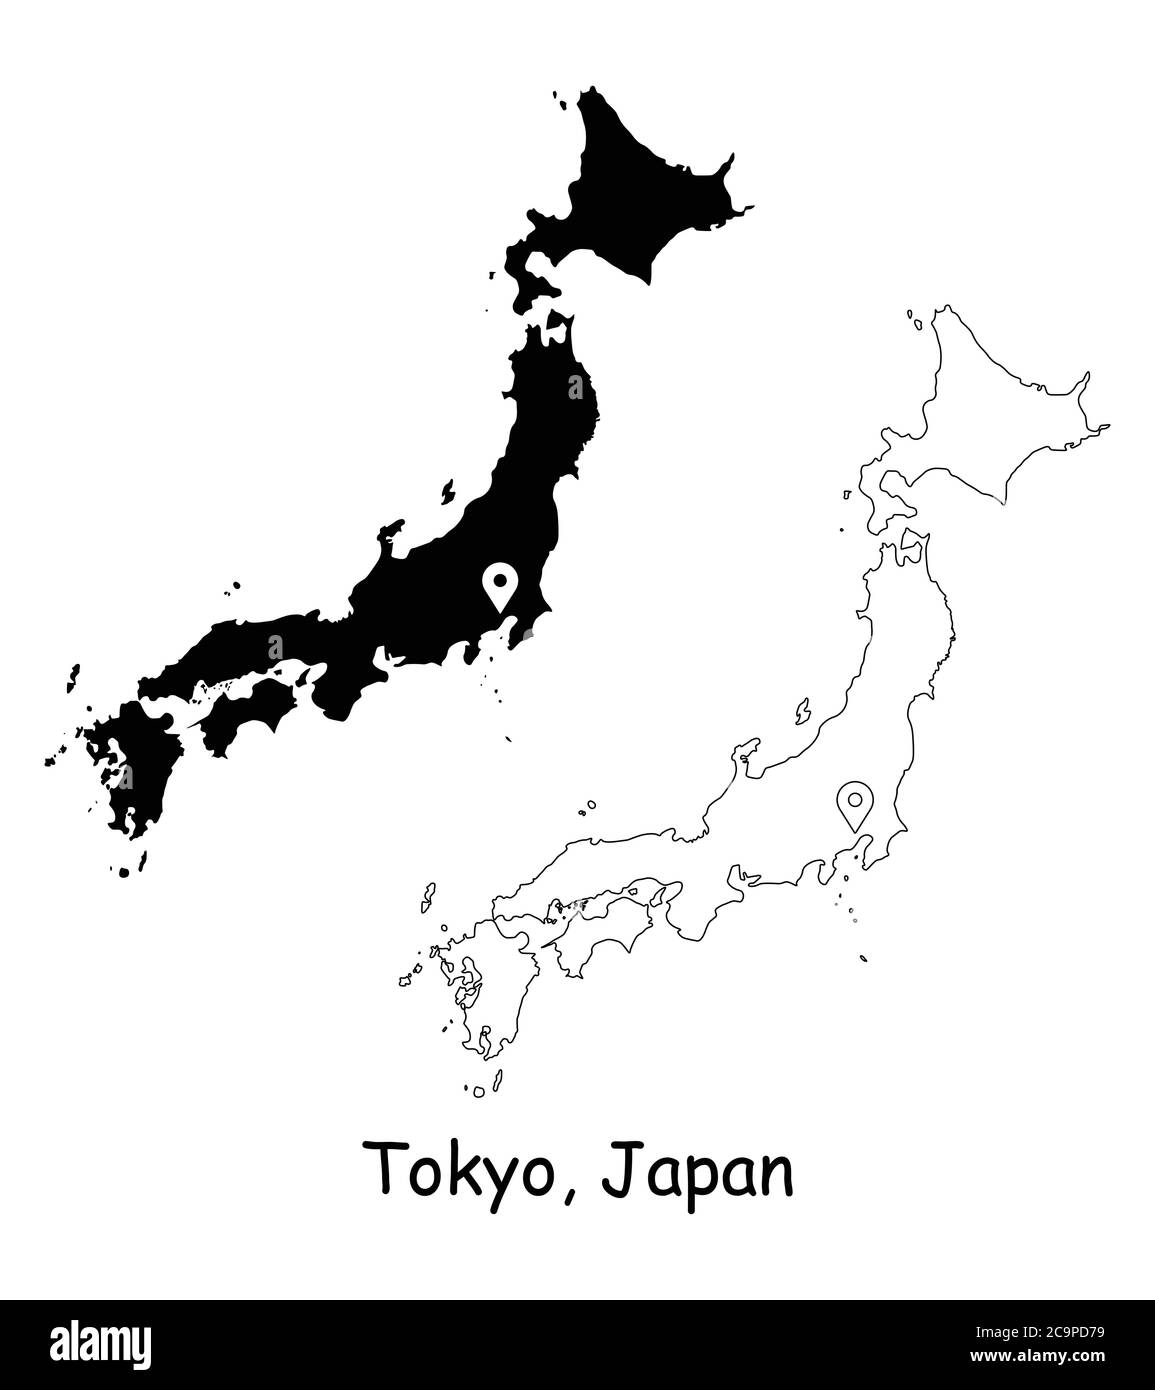 Tokyo Japan. Detailed Country Map with Location Pin on Capital City. Black silhouette and outline maps isolated on white background. EPS Vector Stock Vector